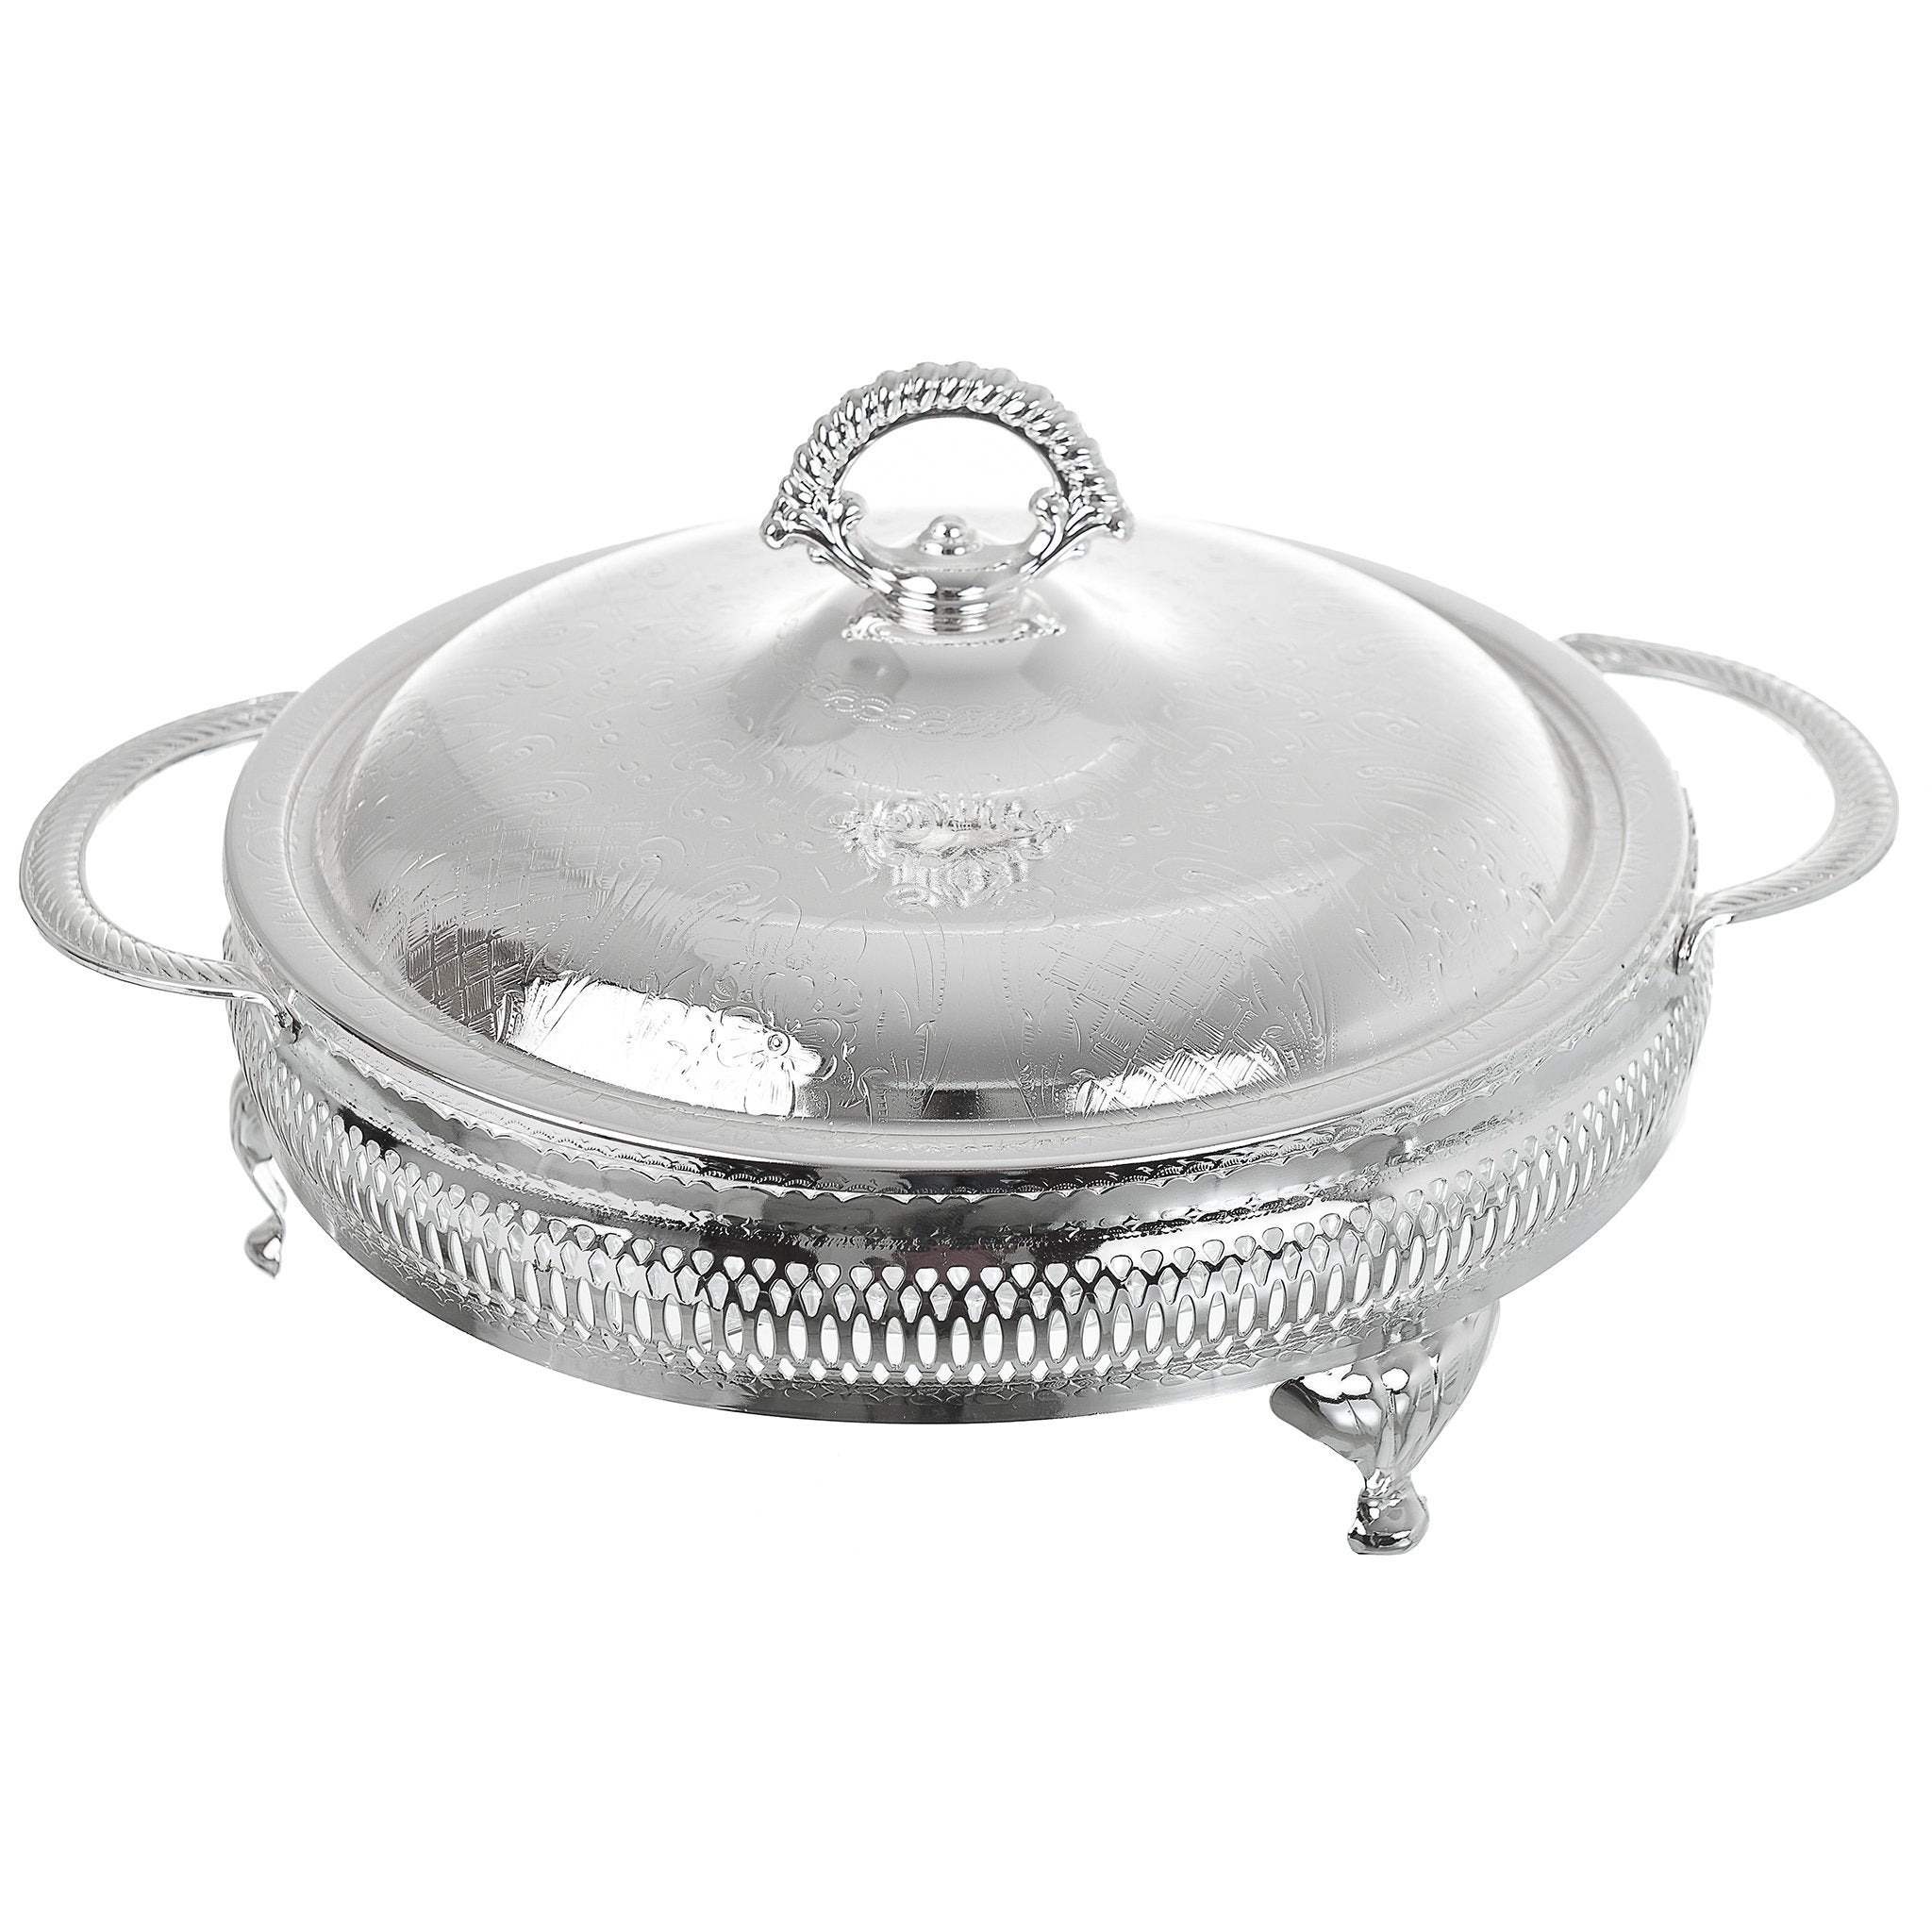 Queen Anne - Round Hors d'oeuvre 5 Parts with Silver Plated Cover - Silver Plated Metal & Glass - 25cm - 26000415